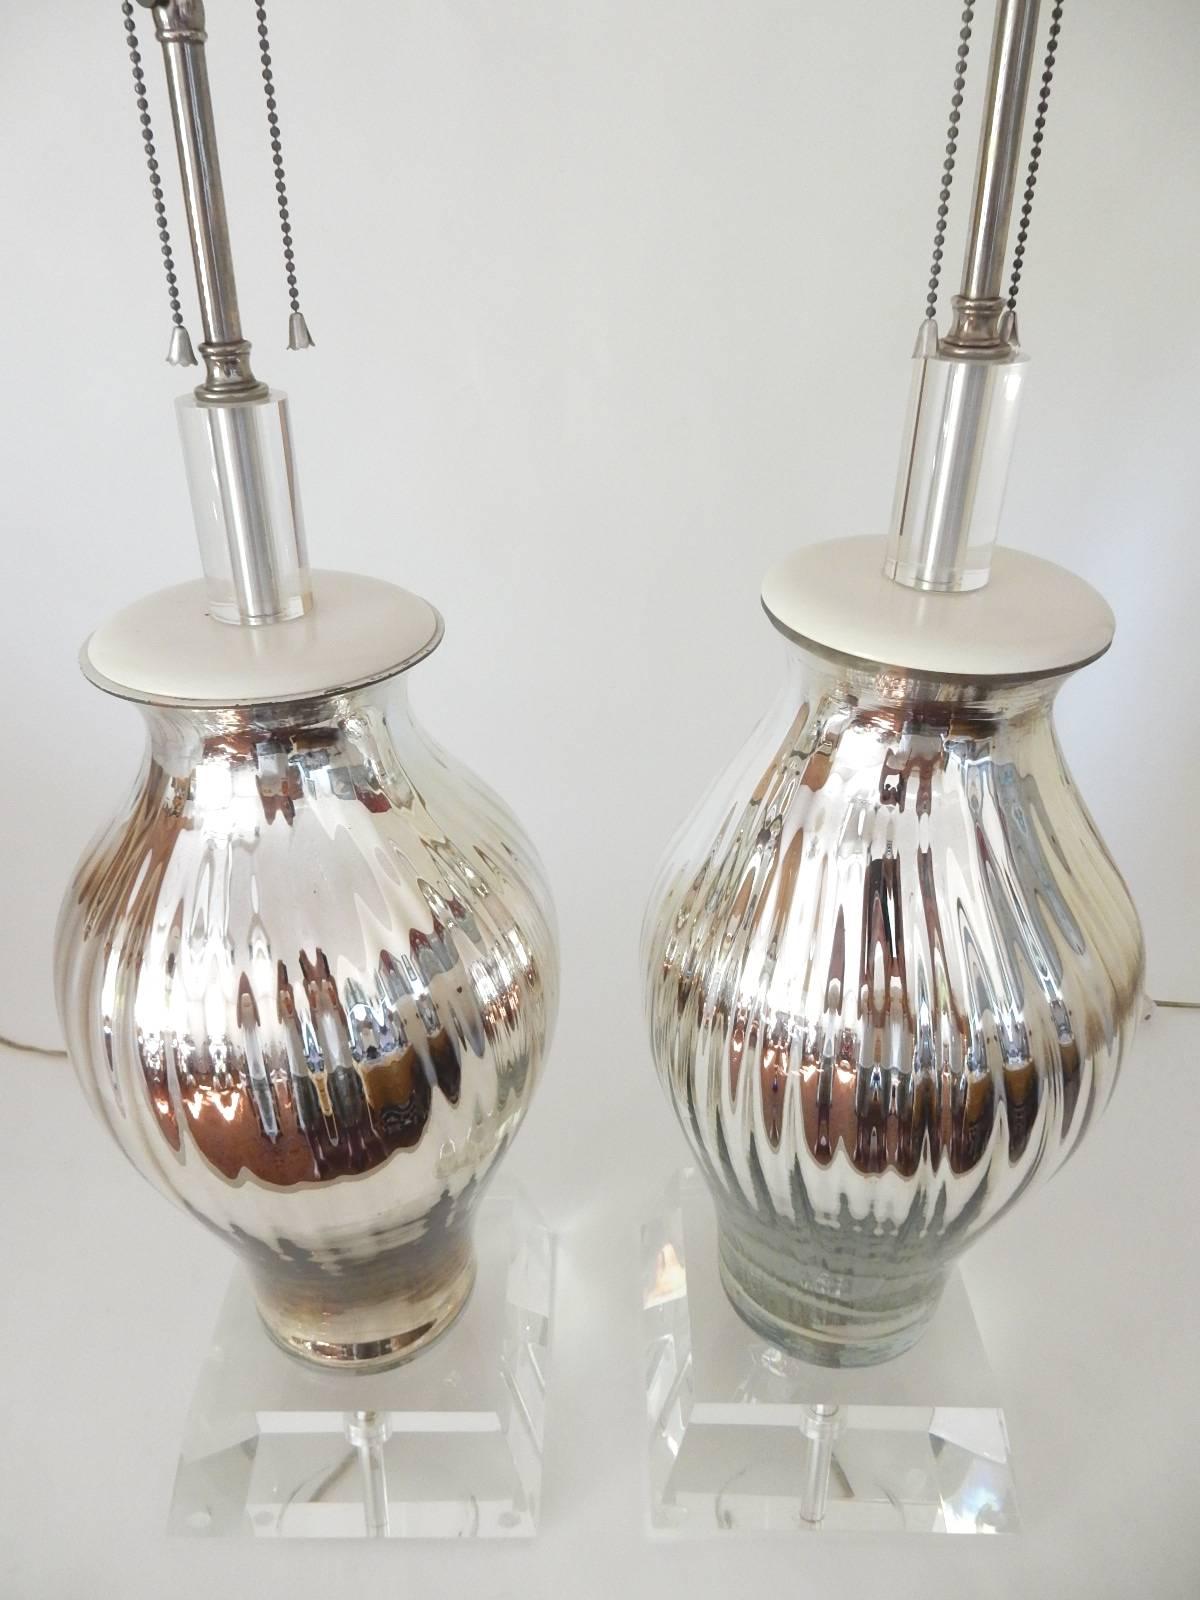 This is an incredible pair of vintage lamps made of handblown swirl art glass vase in gleaming mercury with a thick solid Lucite base and top. Chrome hardware.
Excellent condition with no damage of any kind.